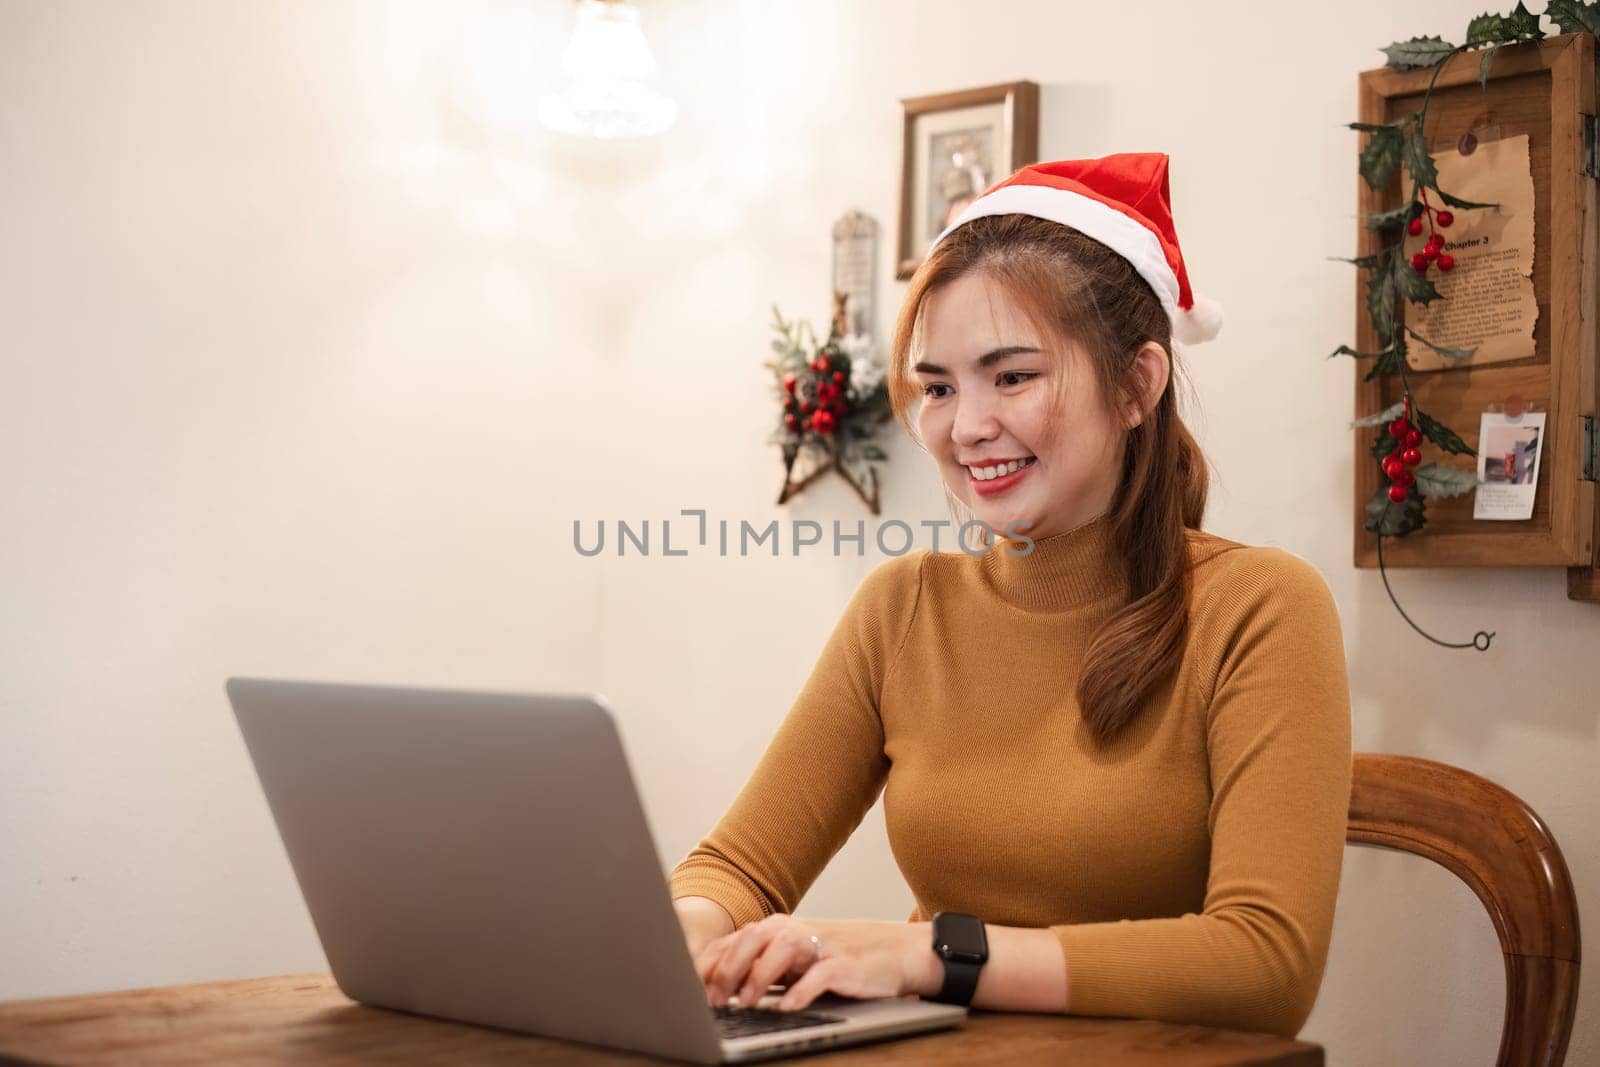 A startup employee writes a report on a laptop on Christmas Eve. In an office decorated with colorful bulbs and lights during the Christmas holidays.